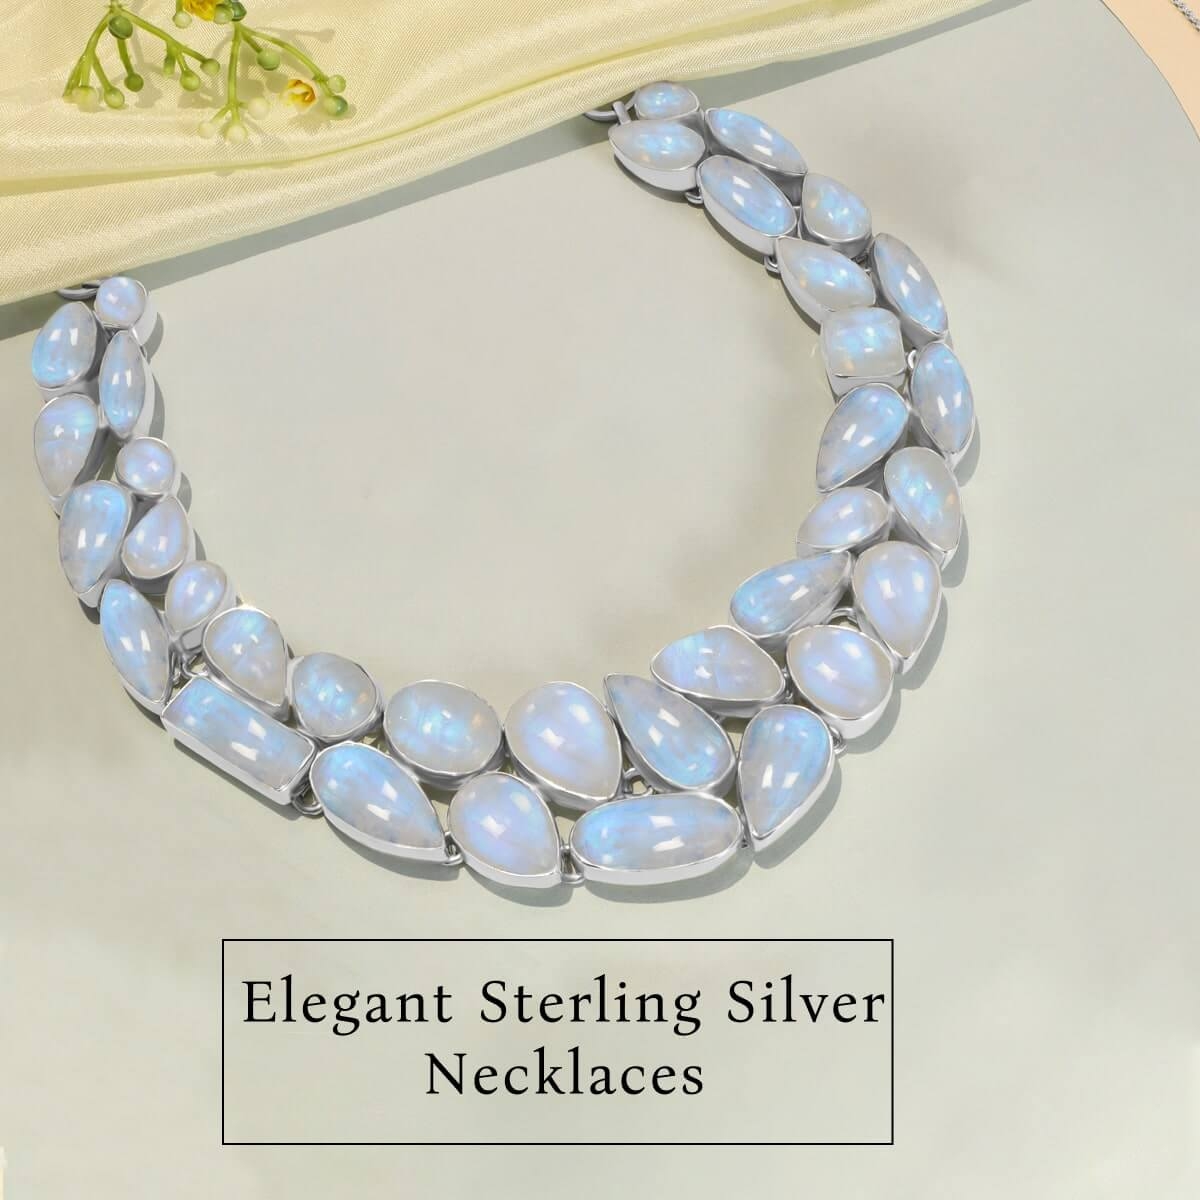 Why Are Sterling Silver Necklaces Best?